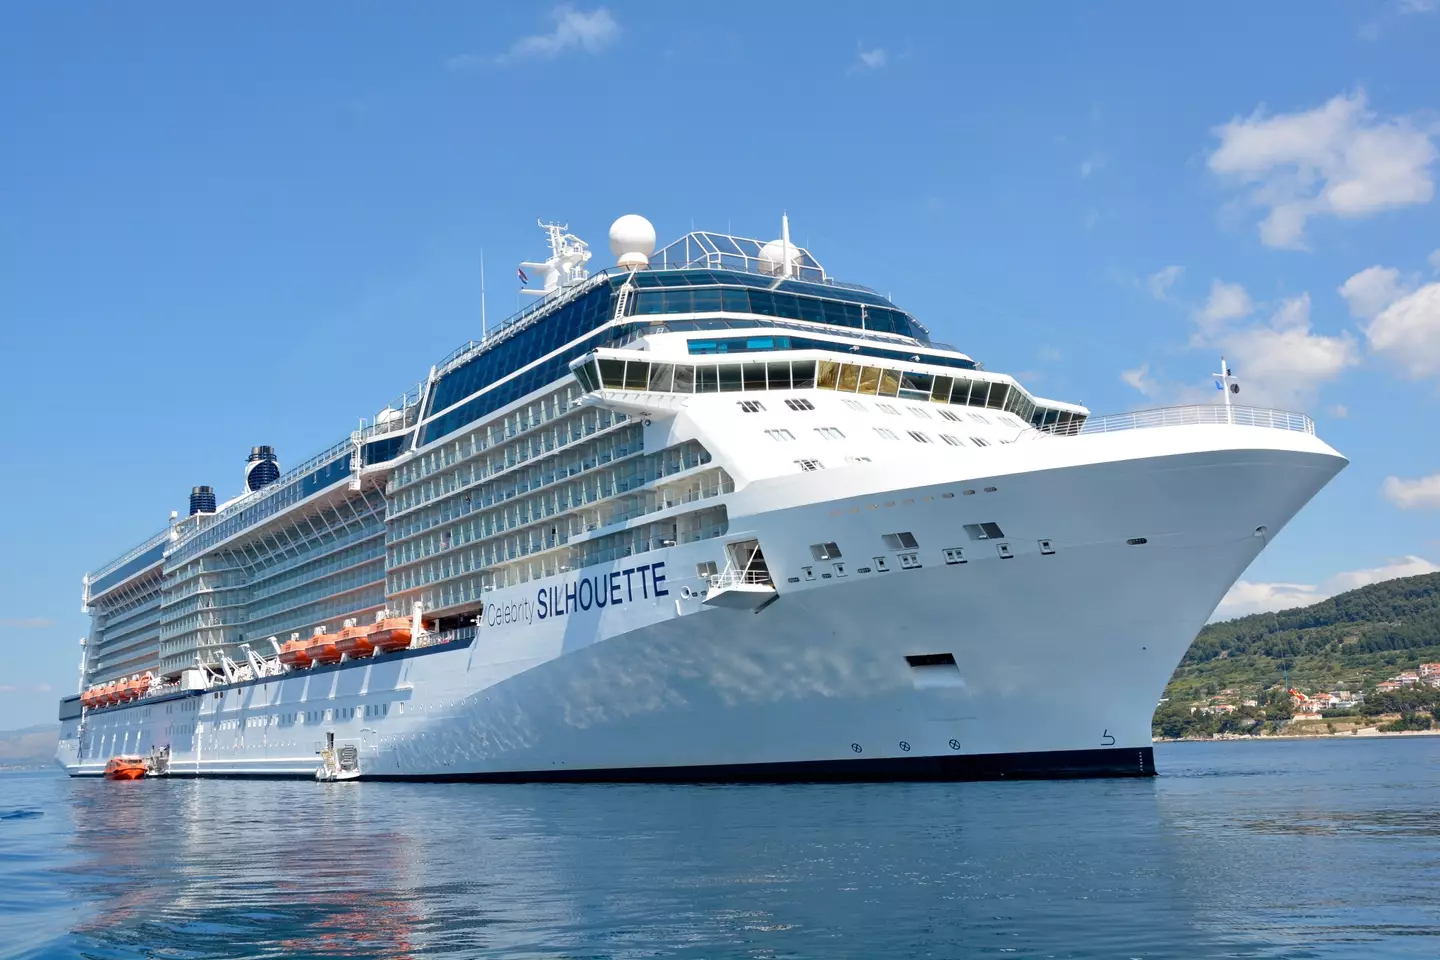 The victim's family are suing the cruise line for $1 million.